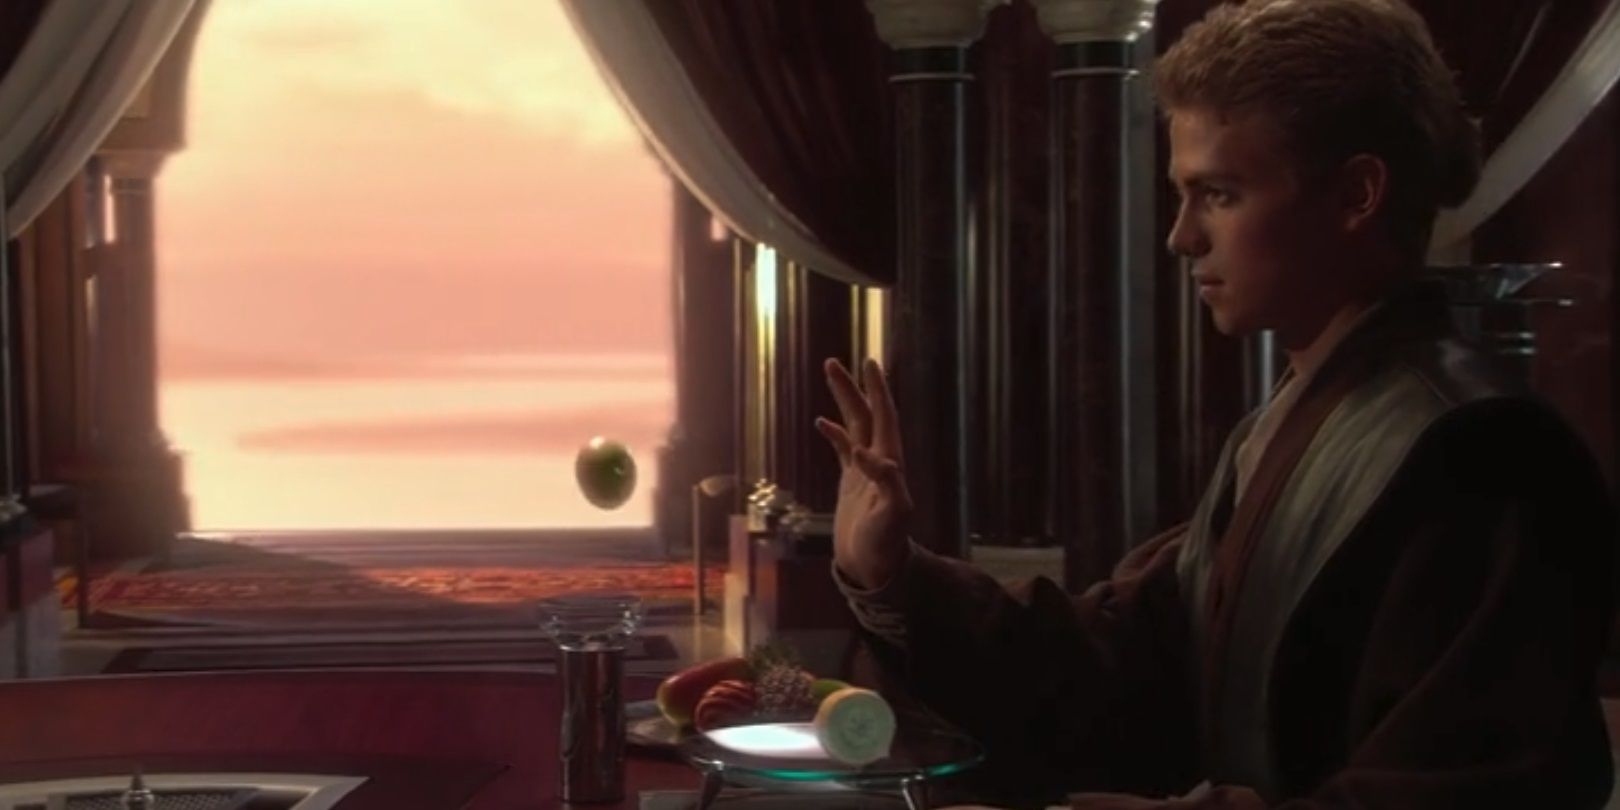 Anakin moves a pear with the Force in Attack of the Clones